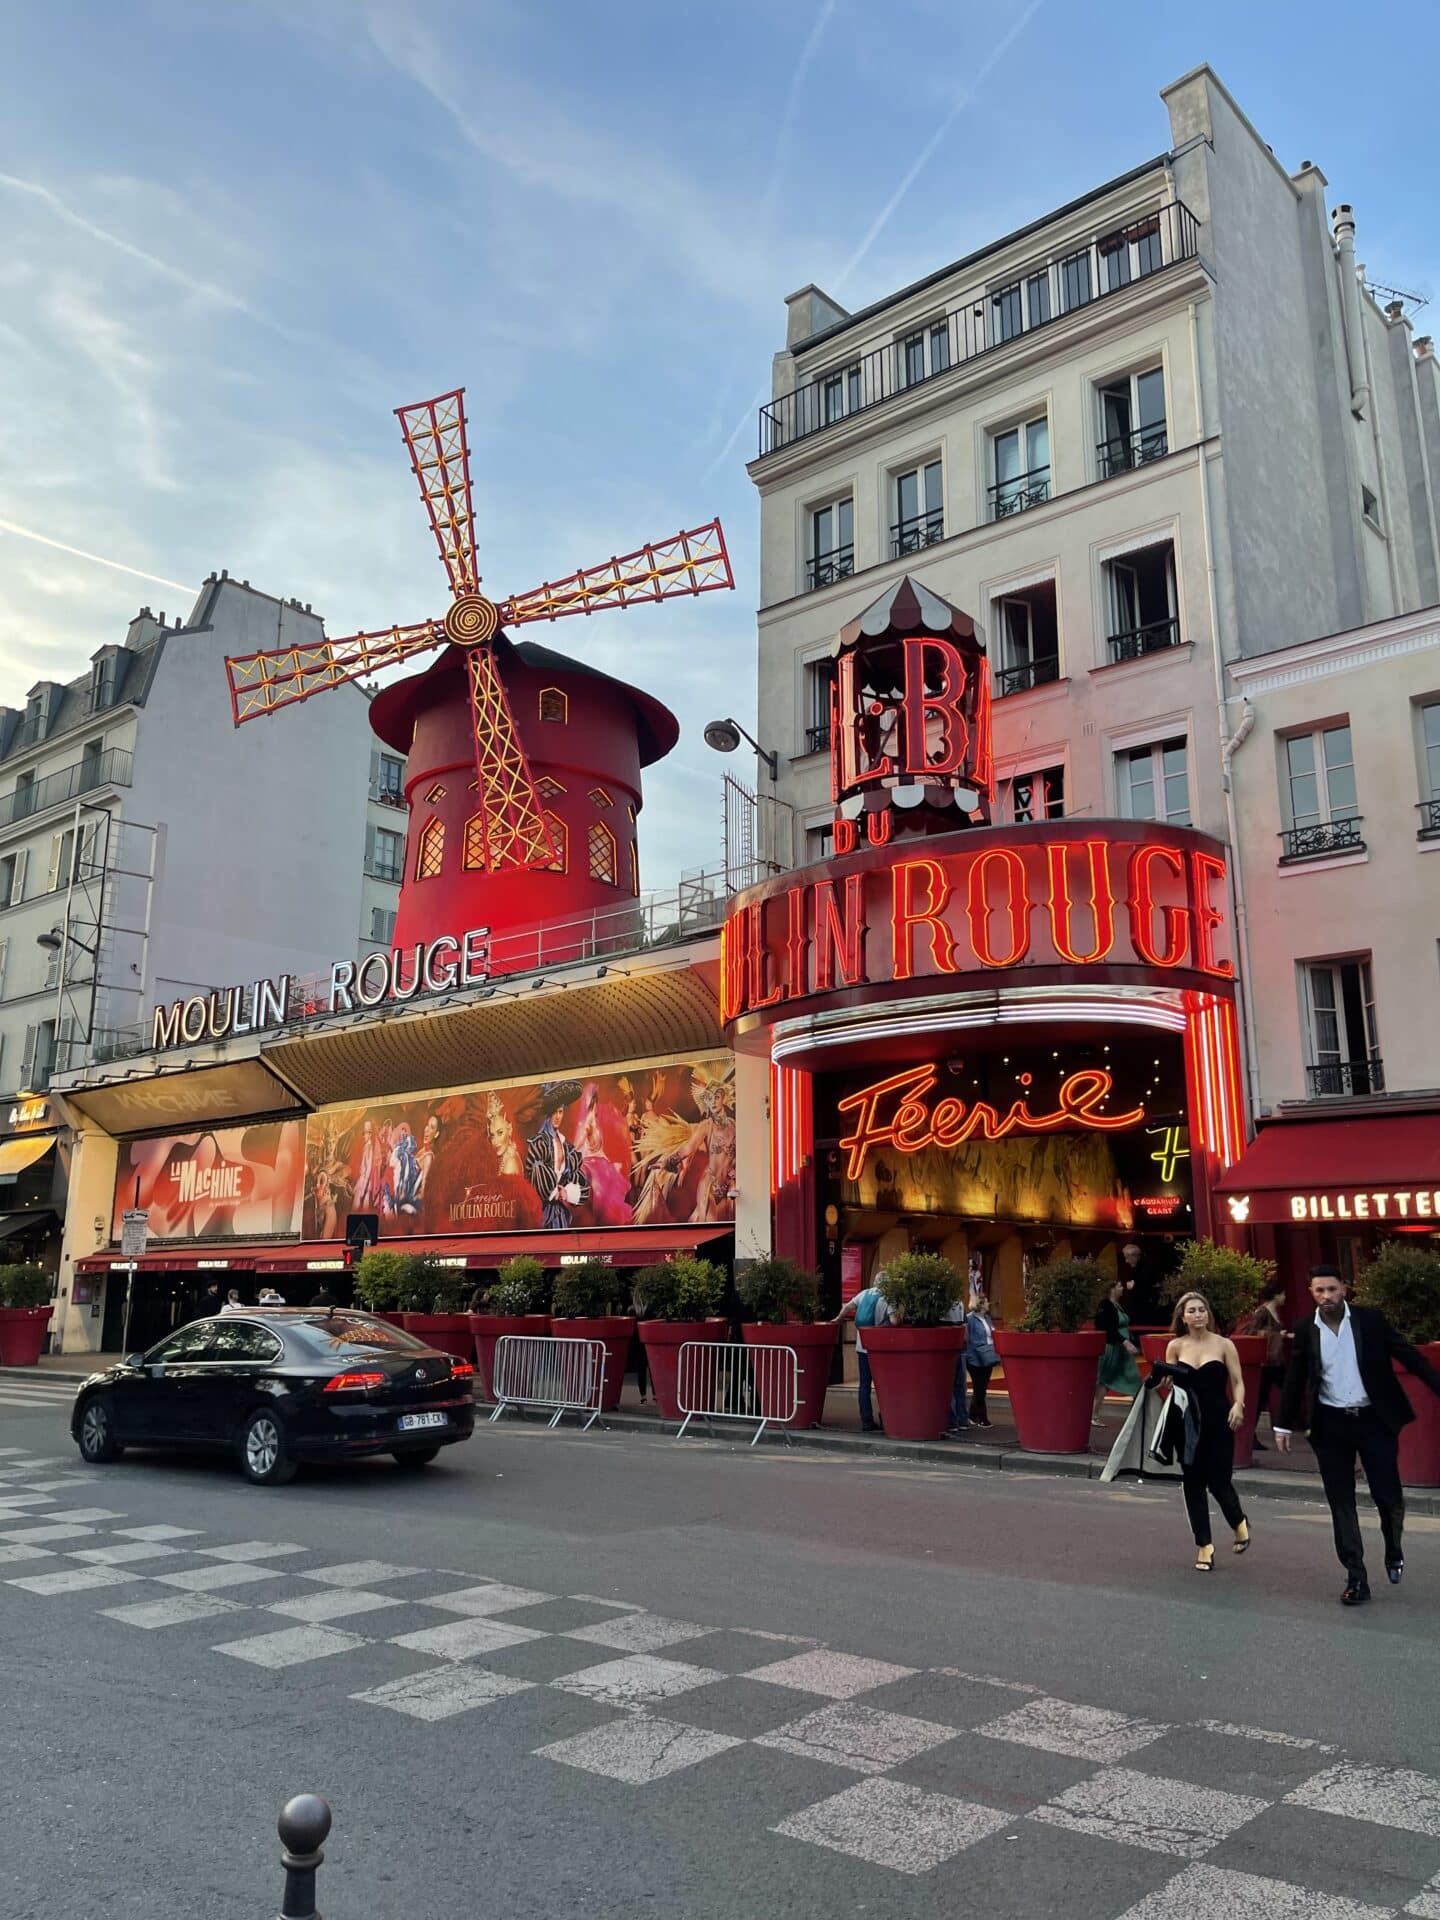 The iconic Moulin Rouge lit up at dusk, showcasing its famous red windmill against a twilight sky, with people walking and cars driving by, capturing the vibrant nightlife of Paris.